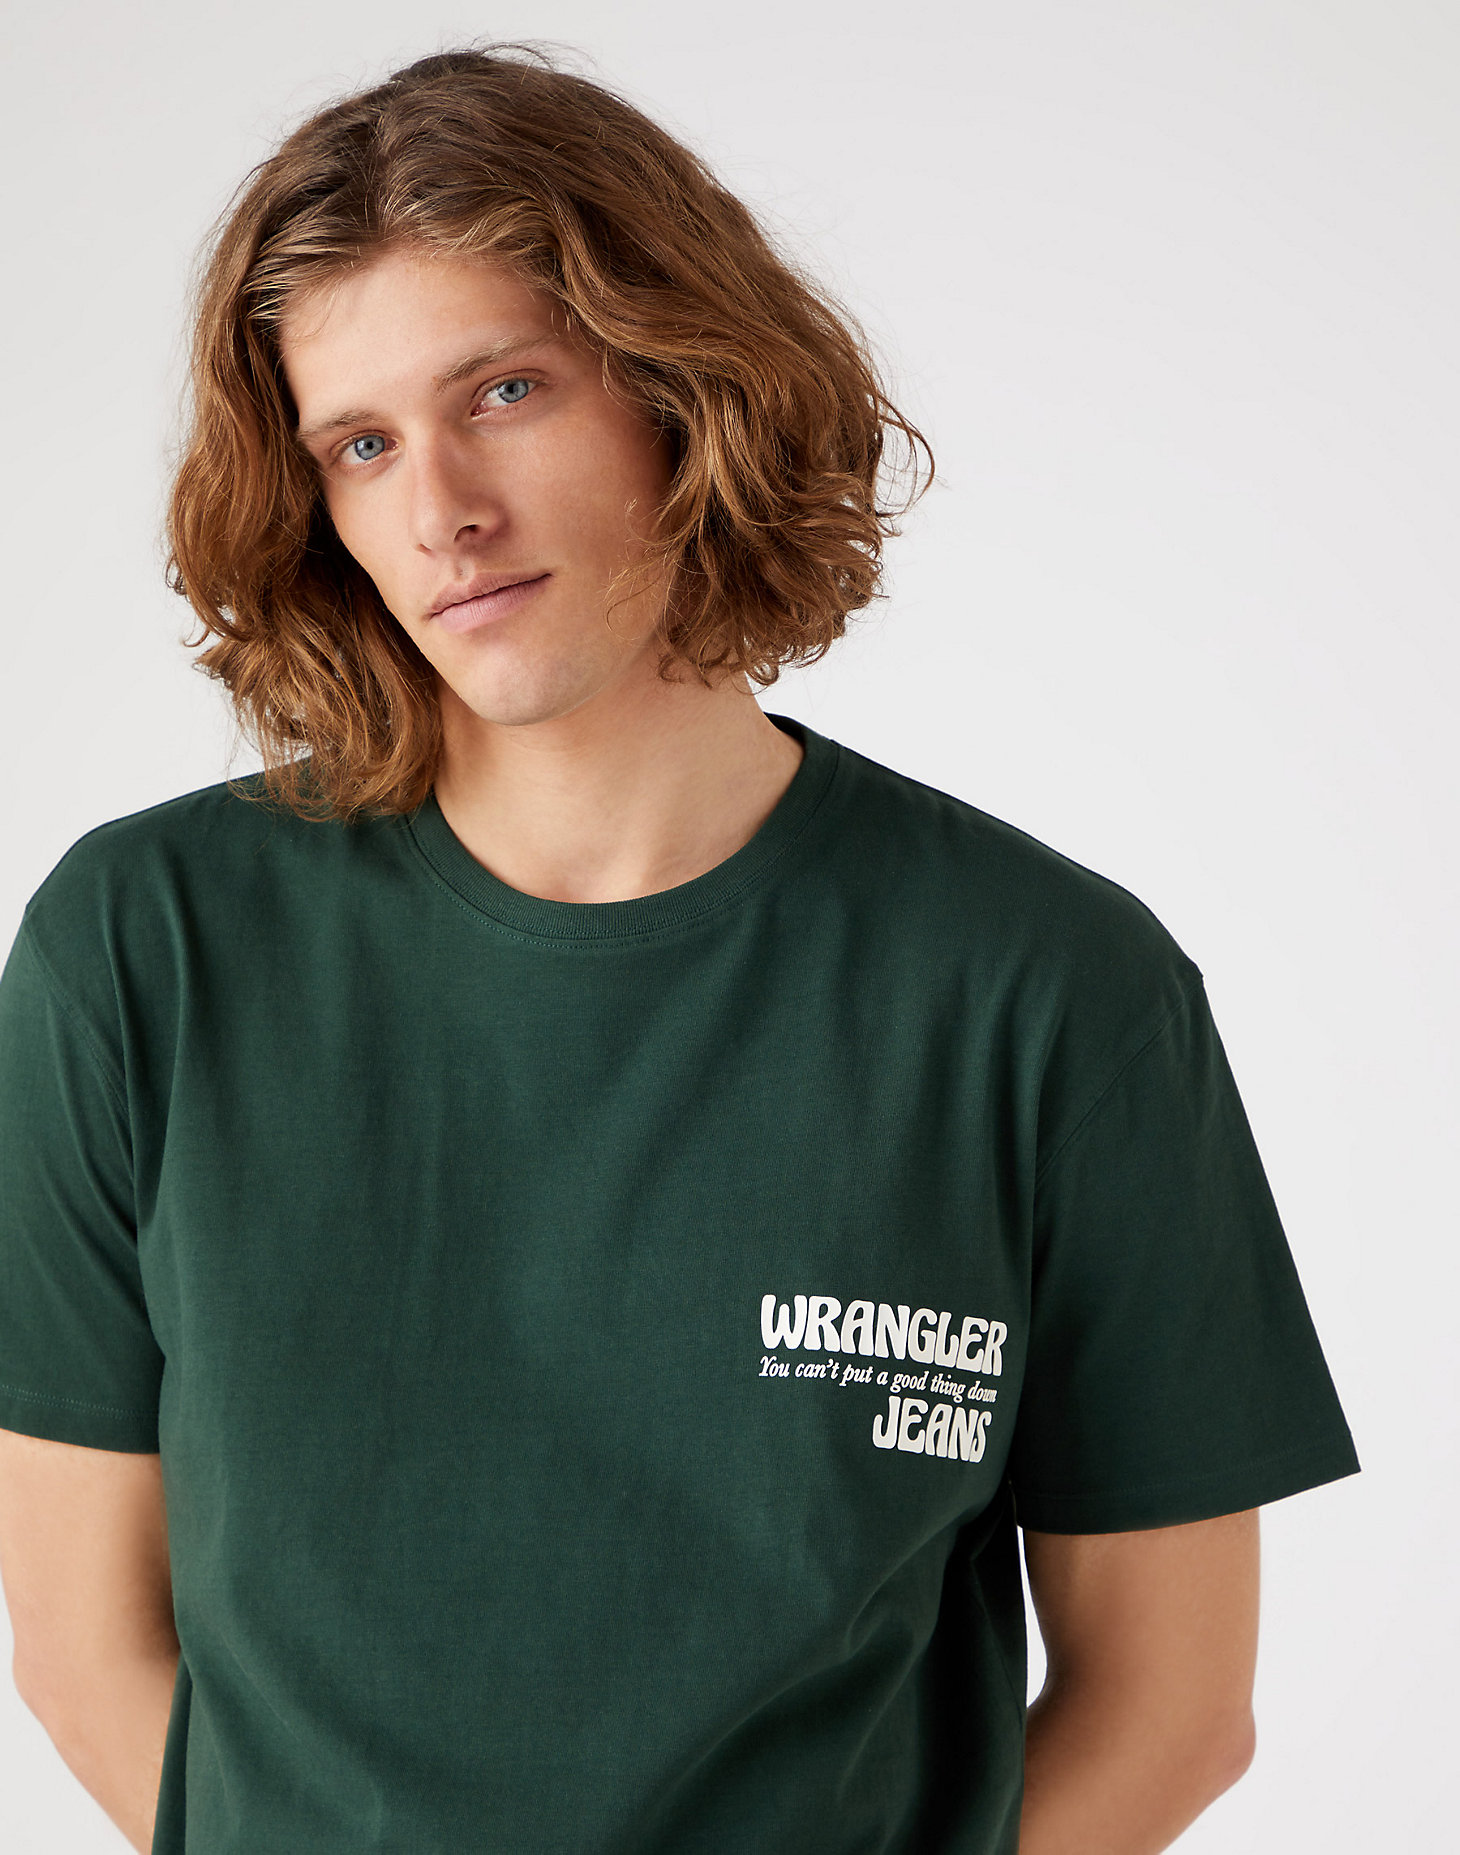 Slogan Tee in Sycamore Green alternative view 3